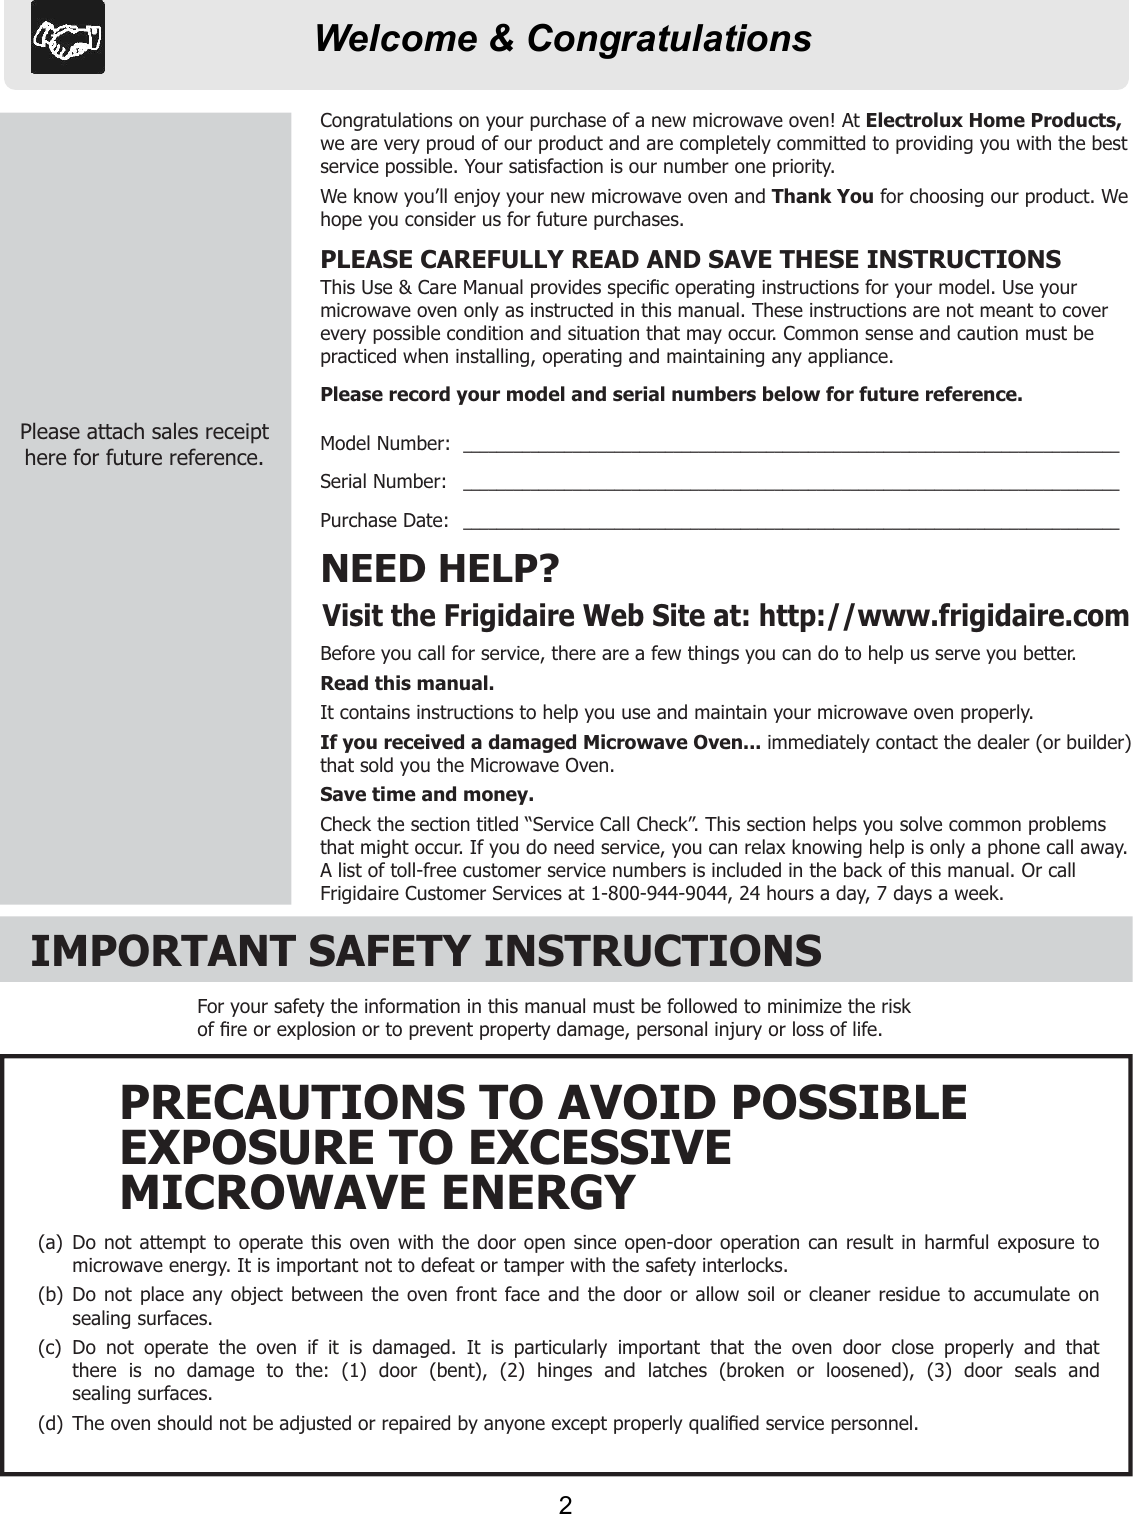 Welcome &amp; CongratulationsBefore you call for service, there are a few things you can do to help us serve you better.Read this manual.It contains instructions to help you use and maintain your microwave oven properly.If you received a damaged Microwave Oven... immediately contact the dealer (or builder) that sold you the Microwave Oven.Save time and money.Check the section titled “Service Call Check”. This section helps you solve common problems that might occur. If you do need service, you can relax knowing help is only a phone call away. A list of toll-free customer service numbers is included in the back of this manual. Or call Frigidaire Customer Services at 1-800-944-9044, 24 hours a day, 7 days a week.NEED HELP?Visit the Frigidaire Web Site at: http://www.frigidaire.comCongratulations on your purchase of a new microwave oven! At Electrolux Home Products,we are very proud of our product and are completely committed to providing you with the best service possible. Your satisfaction is our number one priority.We know you’ll enjoy your new microwave oven and Thank You for choosing our product. We hope you consider us for future purchases.PLEASE CAREFULLY READ AND SAVE THESE INSTRUCTIONSThis Use &amp; Care Manual provides speciﬁ c operating instructions for your model. Use your microwave oven only as instructed in this manual. These instructions are not meant to cover every possible condition and situation that may occur. Common sense and caution must be practiced when installing, operating and maintaining any appliance.Please record your model and serial numbers below for future reference.Model Number:  ______________________________________________________________________________Serial Number:   ______________________________________________________________________________Purchase Date:   ______________________________________________________________________________Please attach sales receipthere for future reference.IMPORTANT SAFETY INSTRUCTIONSFor your safety the information in this manual must be followed to minimize the risk of ﬁ re or explosion or to prevent property damage, personal injury or loss of life.(a)  Do not attempt to operate this oven with the door open since open-door operation can result in harmful exposure to  microwave energy. It is important not to defeat or tamper with the safety interlocks.(b)  Do not place any object between the oven front face and the door or allow soil or cleaner residue to accumulate on  sealing surfaces.(c)  Do not operate the oven if it is damaged. It is particularly important that the oven door close properly and that  there is no damage to the: (1) door (bent), (2) hinges and latches (broken or loosened), (3) door seals and sealing surfaces.(d)  The oven should not be adjusted or repaired by anyone except properly qualiﬁ ed service personnel.PRECAUTIONS TO AVOID POSSIBLEEXPOSURE TO EXCESSIVEMICROWAVE ENERGY2